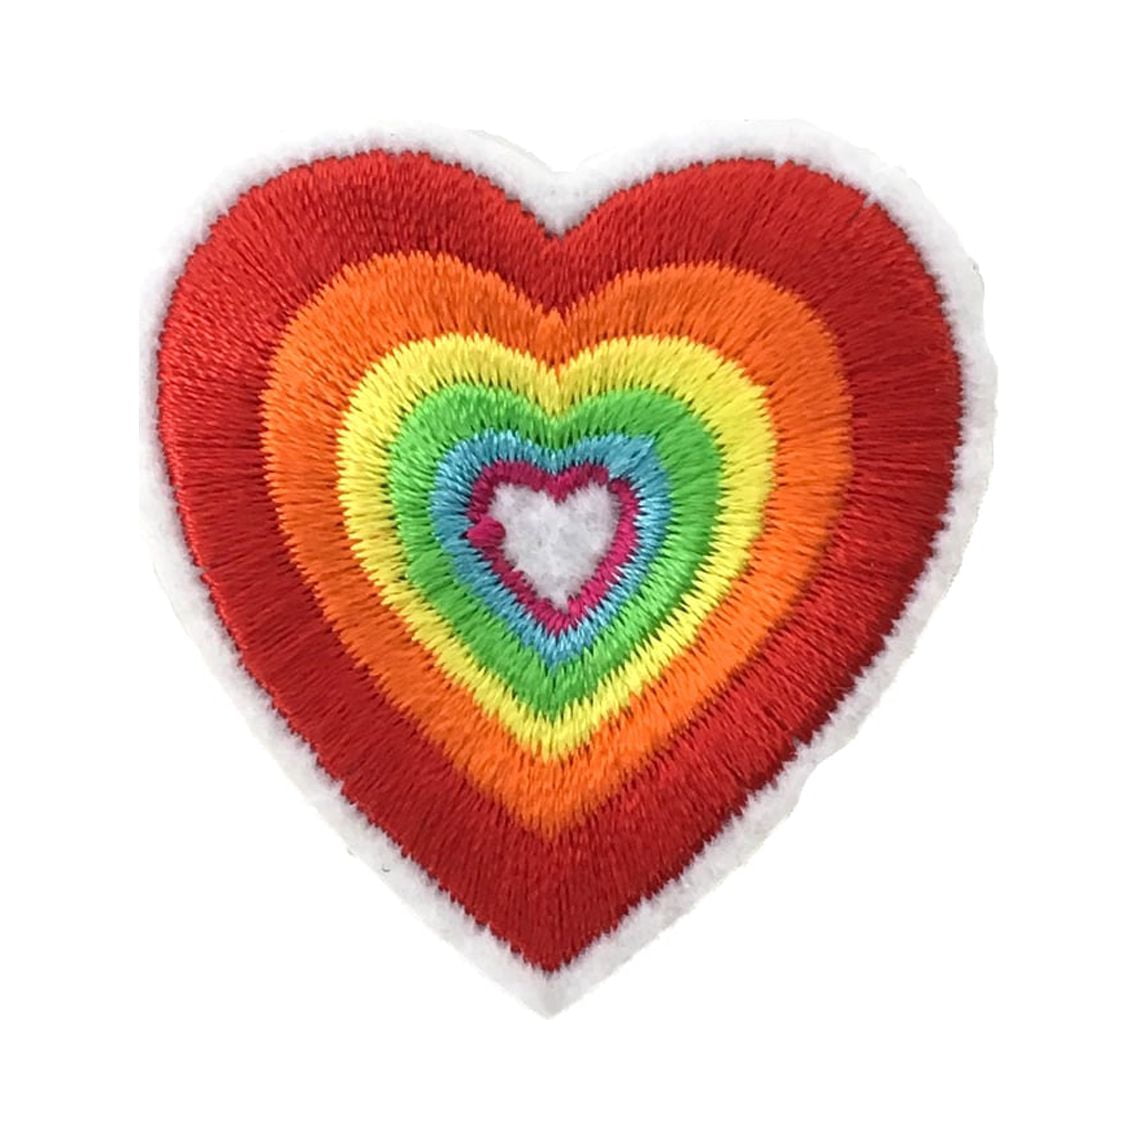 Realistic Human Heart Multi-Color Embroidered Iron-On Patch